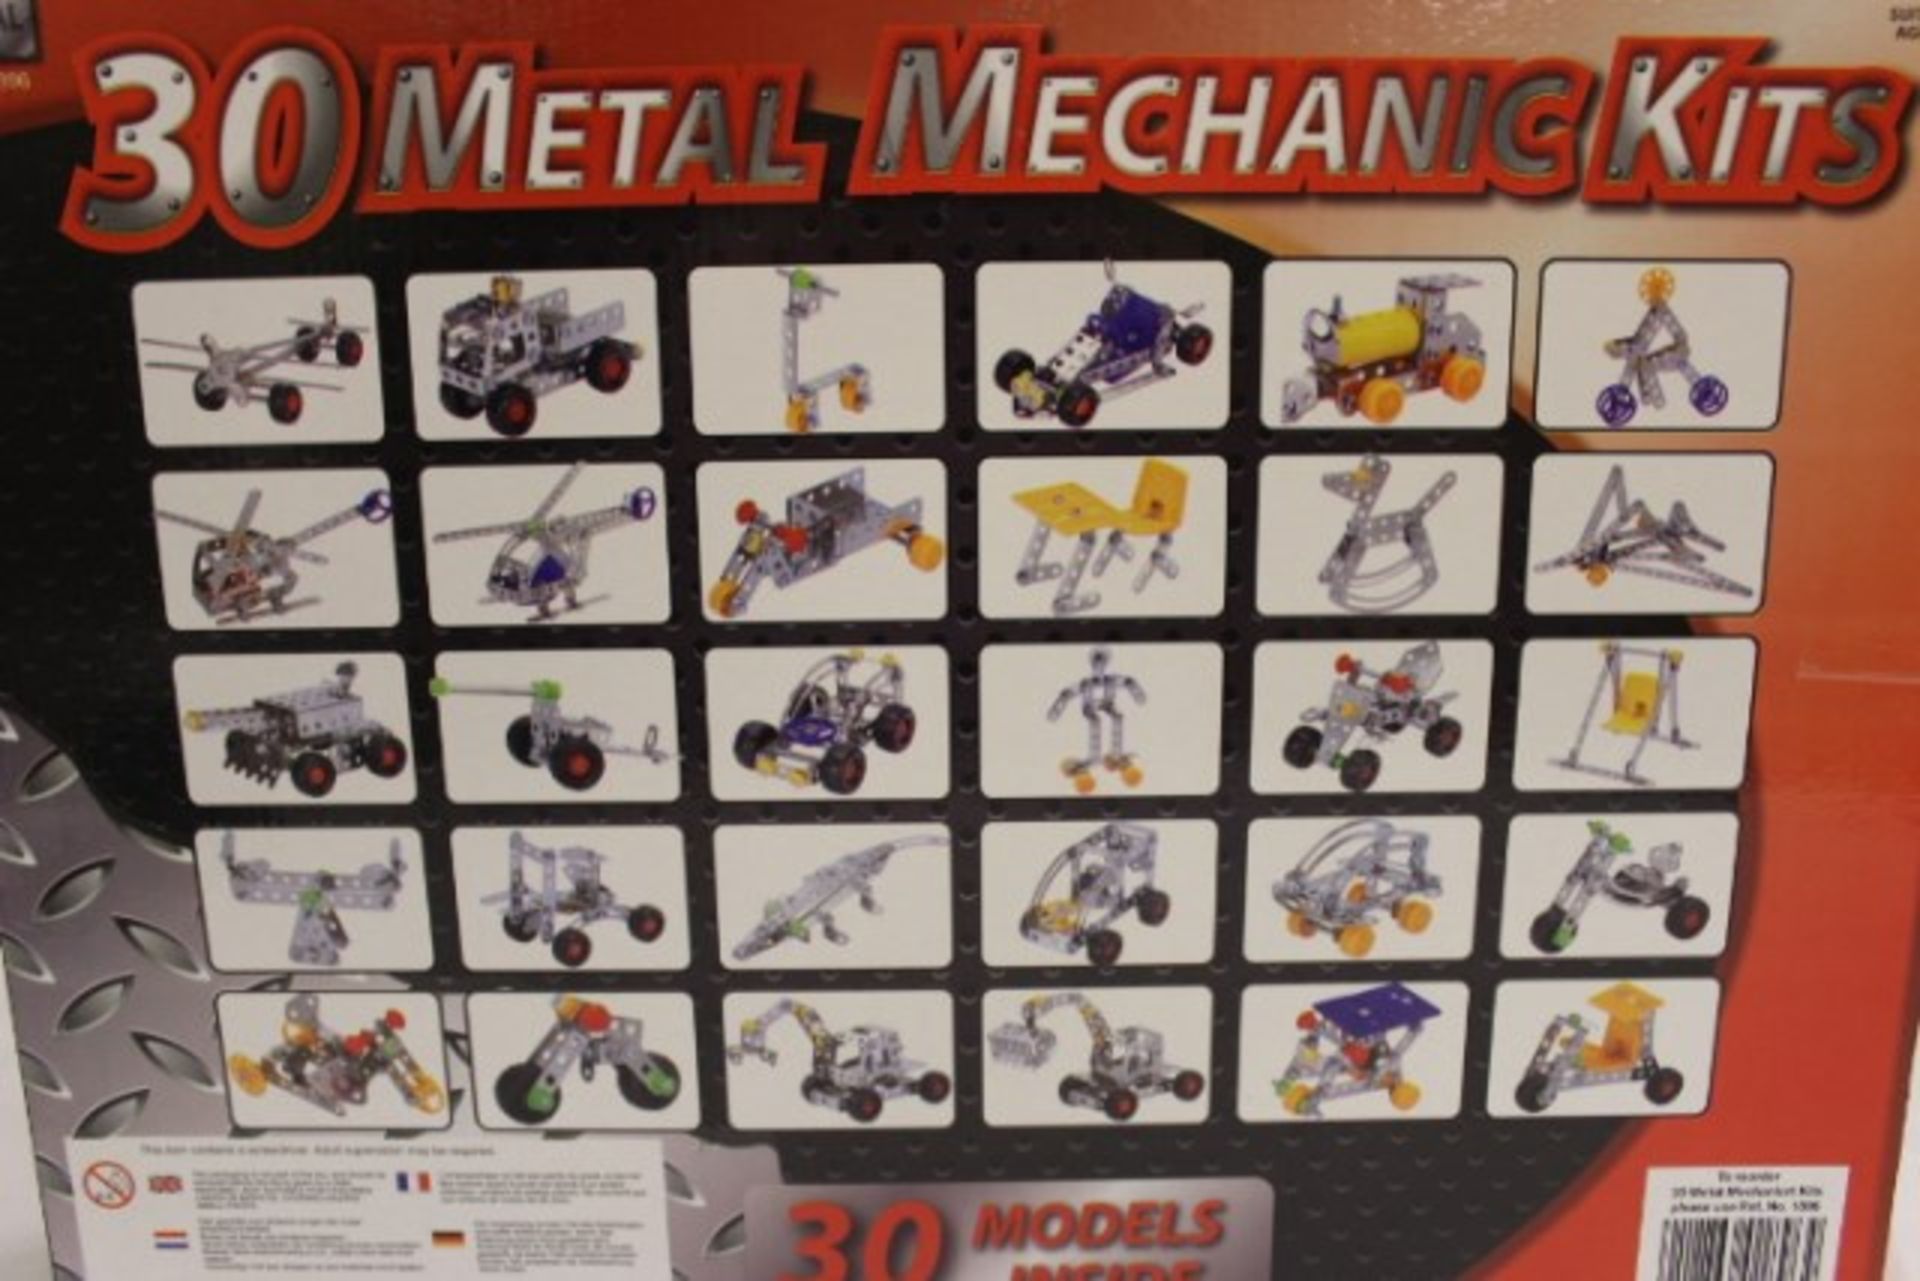 V Brand New 30 Model Metal Mechanics Kit (Makes 30 Different Models) Fits With Meccano - Image 2 of 2